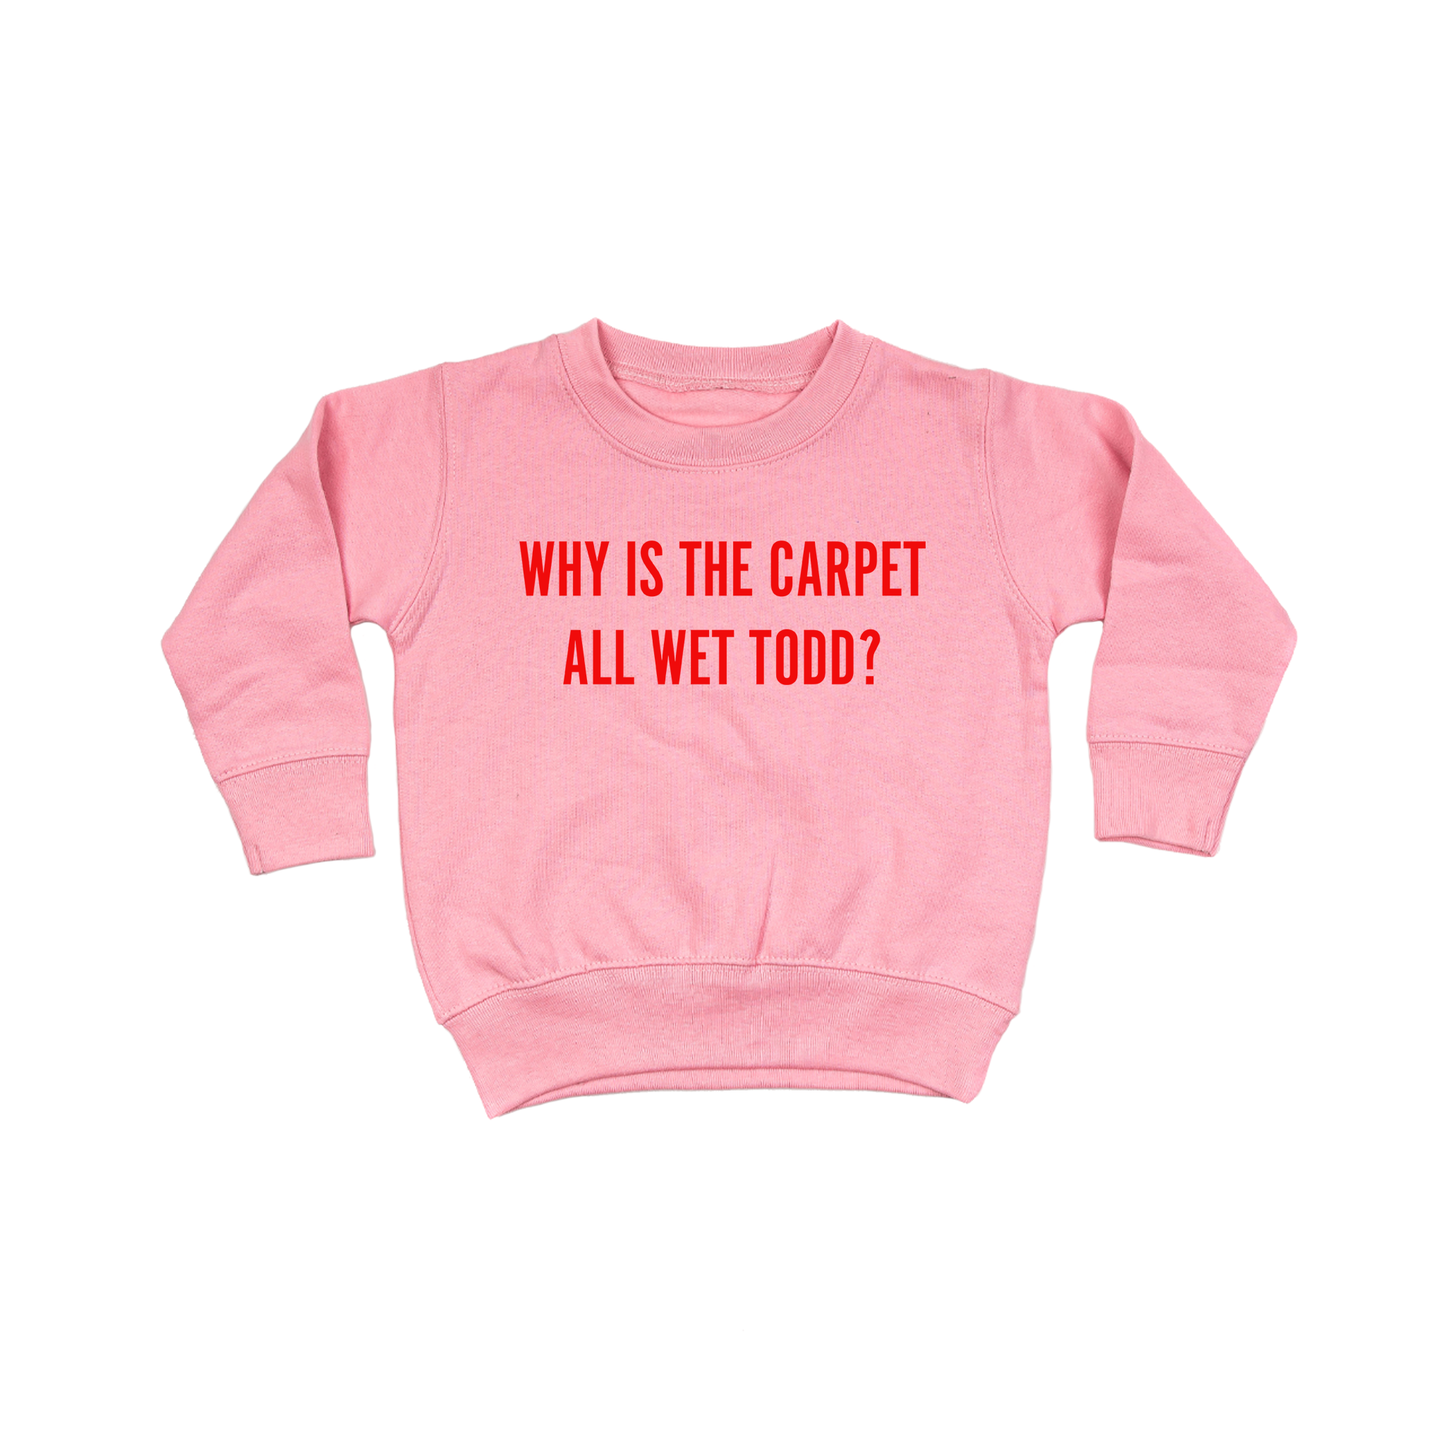 Why Is The Carpet All Wet Todd? (Red) - Kids Sweatshirt (Pink)